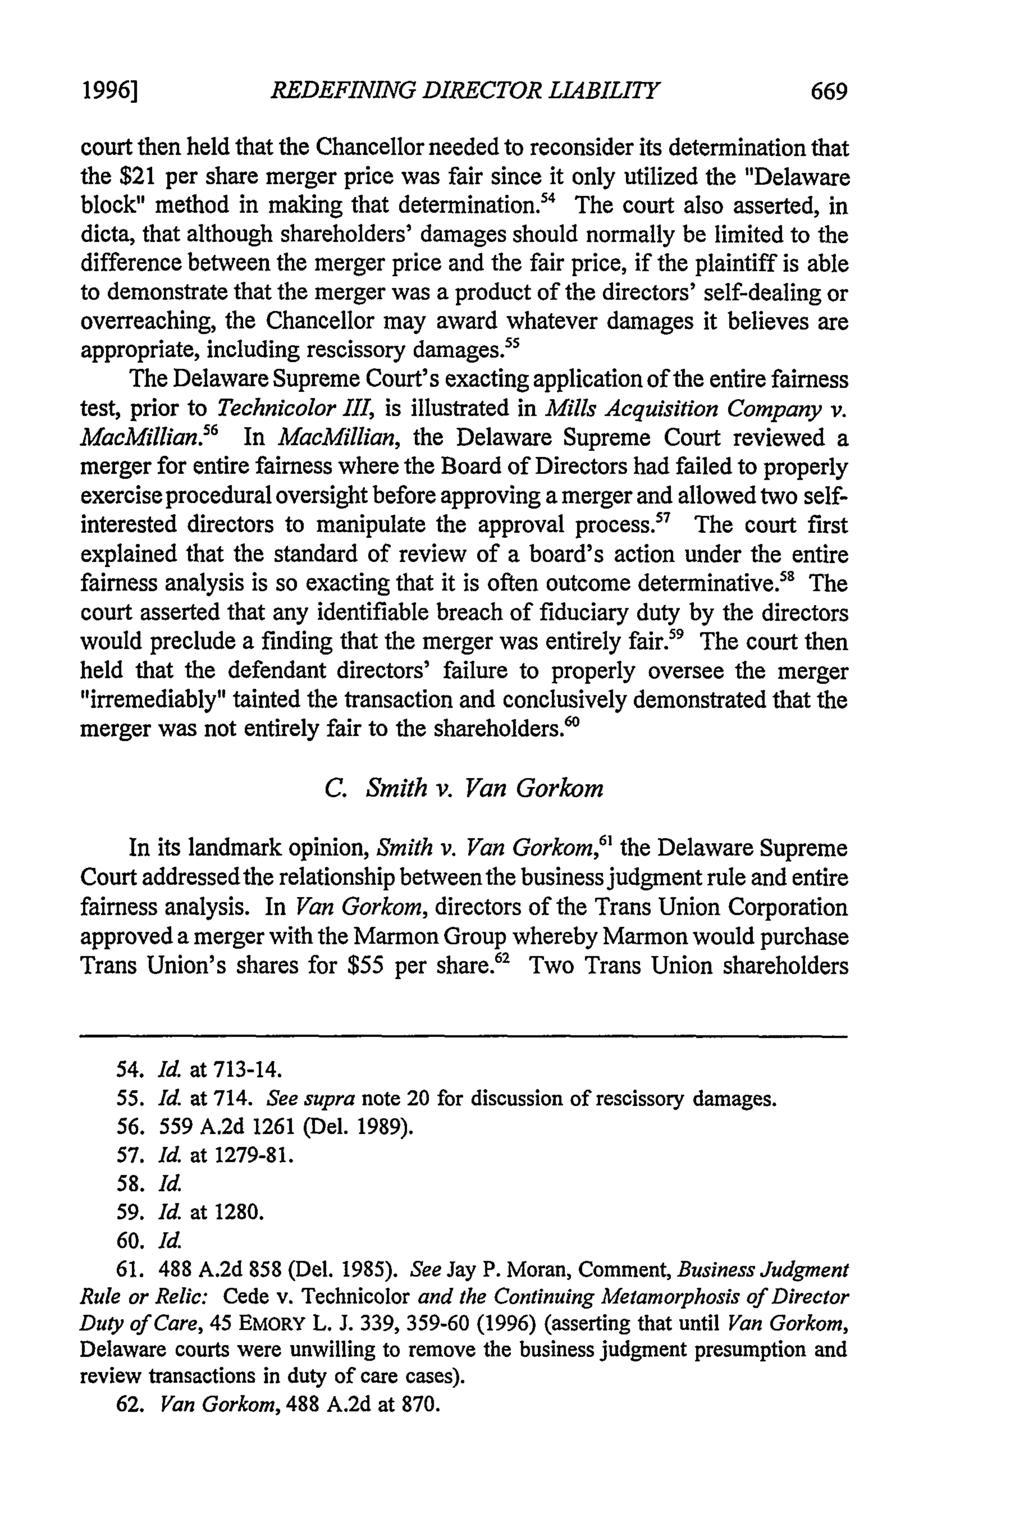 1996] Bacon: Bacon: Redefining Director Liability in Duty of Care Cases: REDEFINING DIRECTOR LIABILITY court then held that the Chancellor needed to reconsider its determination that the $21 per